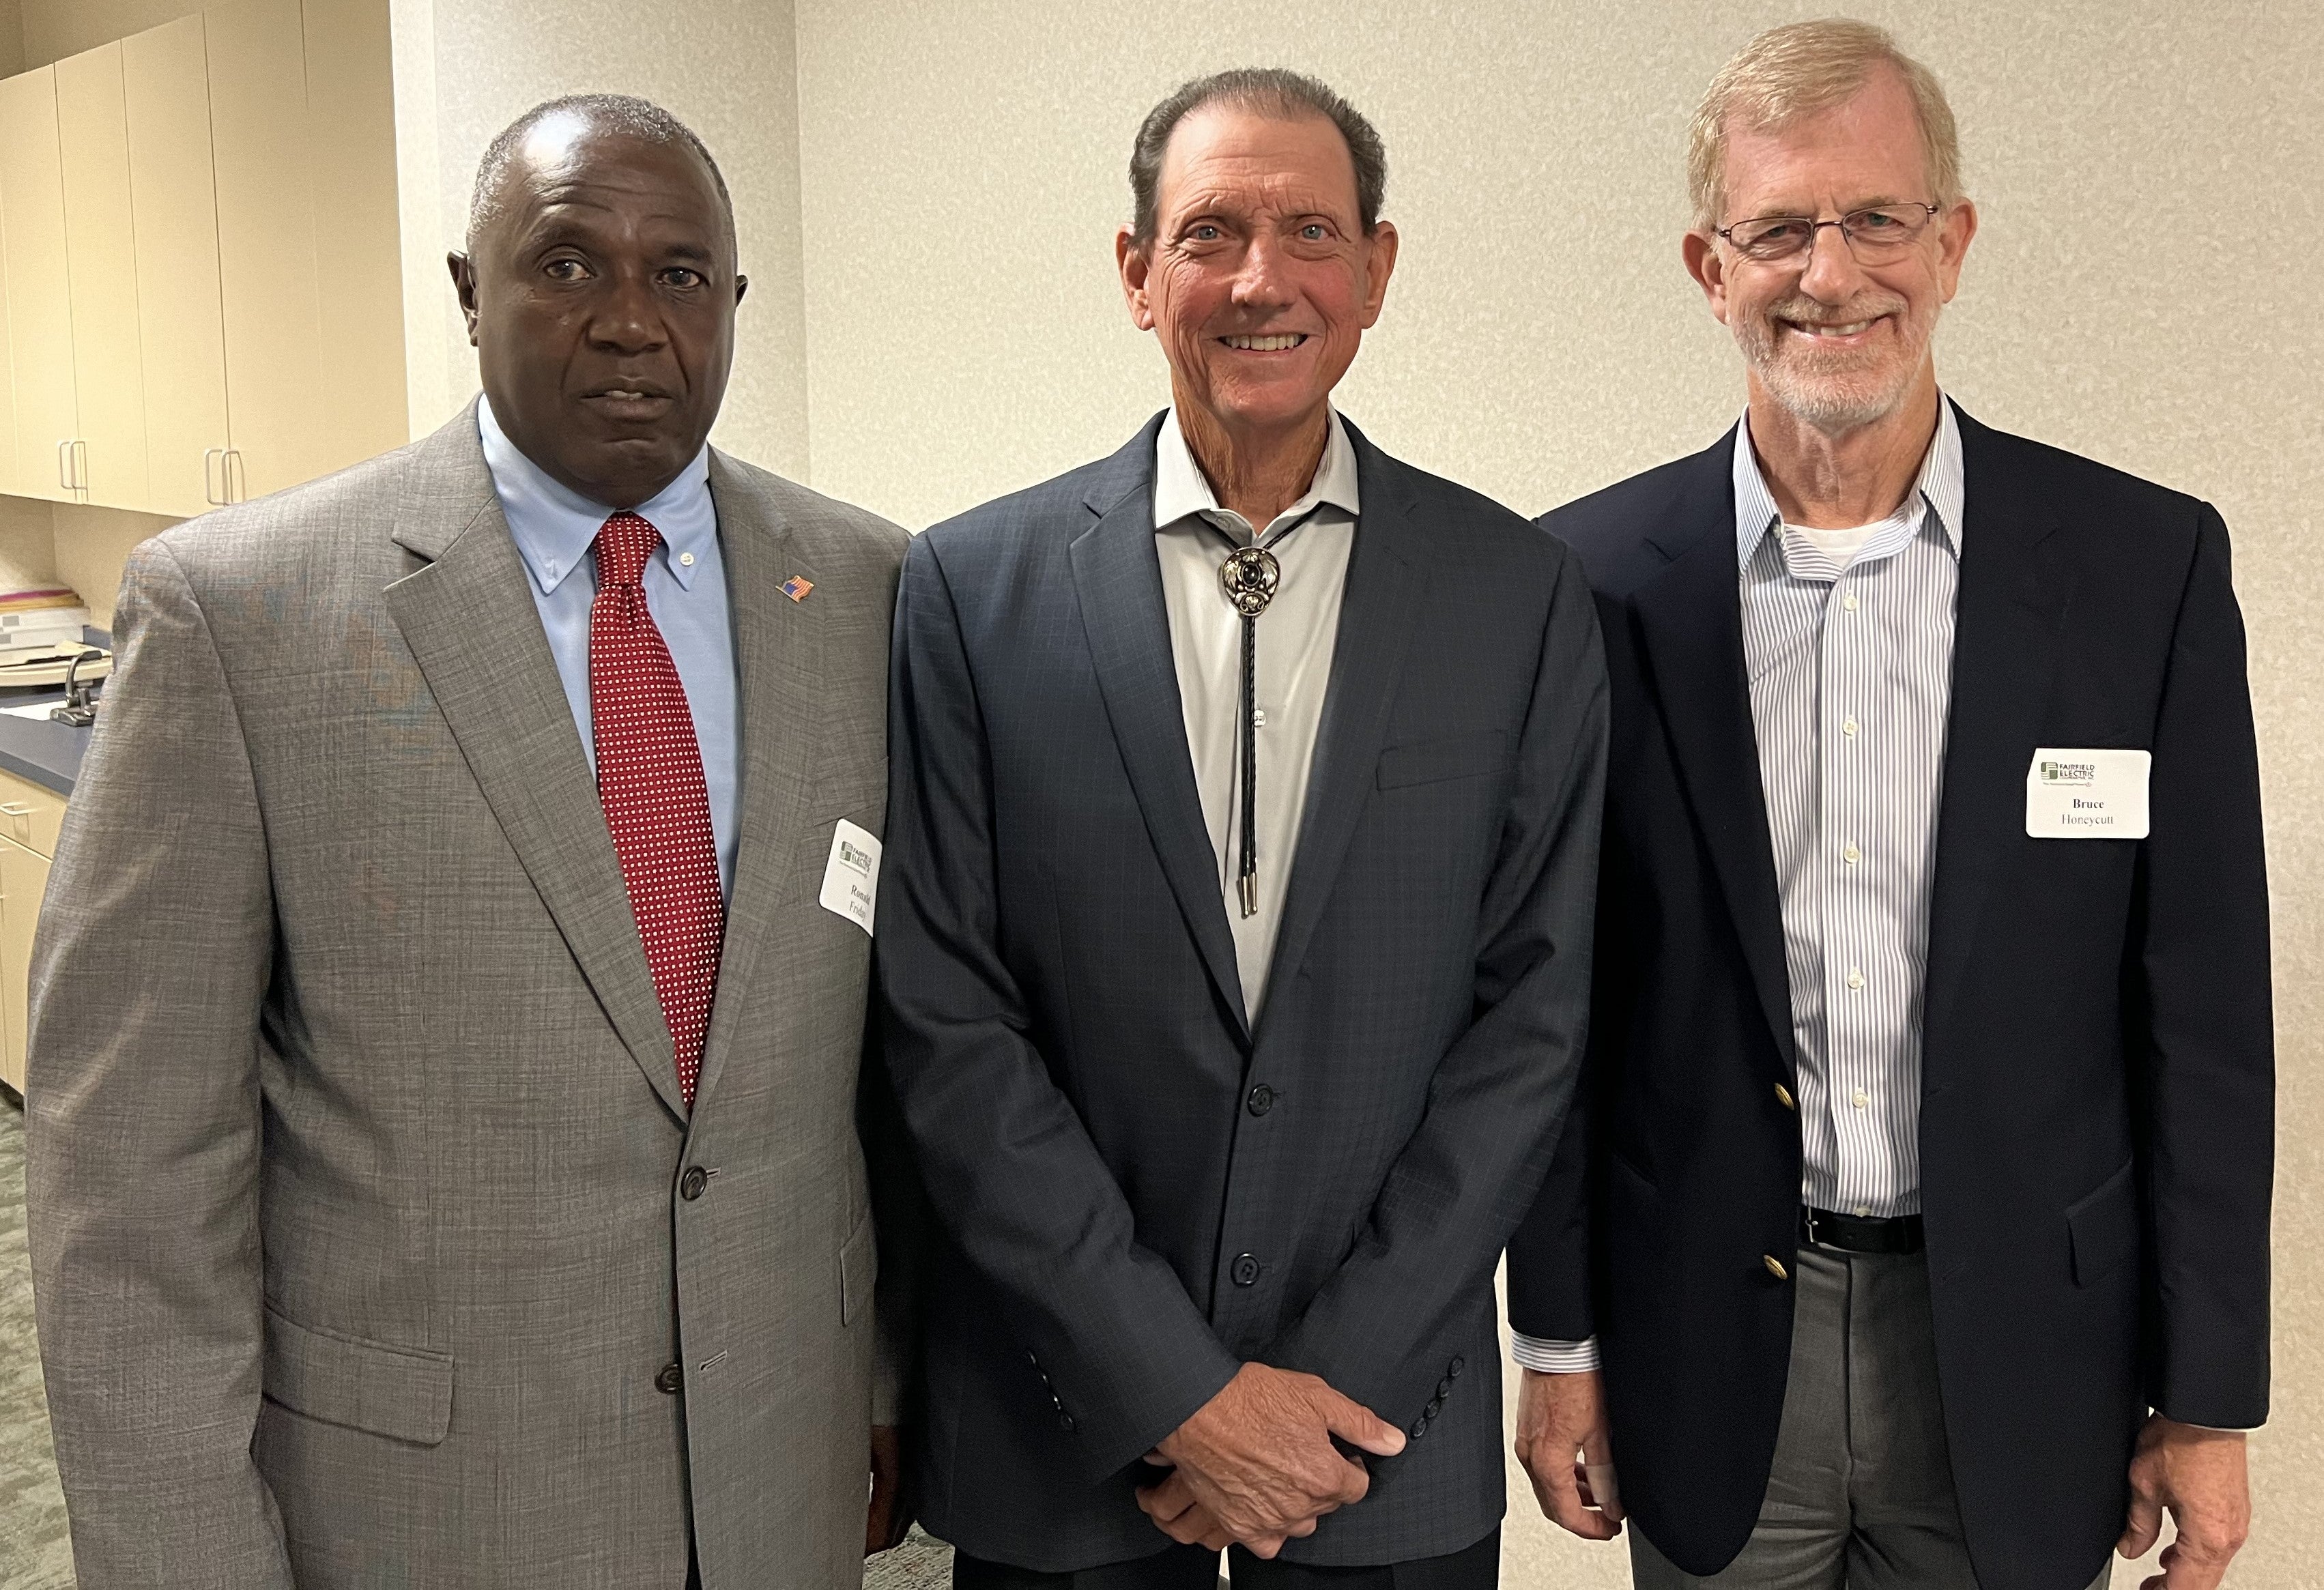 Members elected Ronald D. Friday (District 7), re-elected William M. Good (District 8) and Bruce E. Honeycutt (District 9) to the Board of Trustees.  (Photo Credit: Doug Payne)